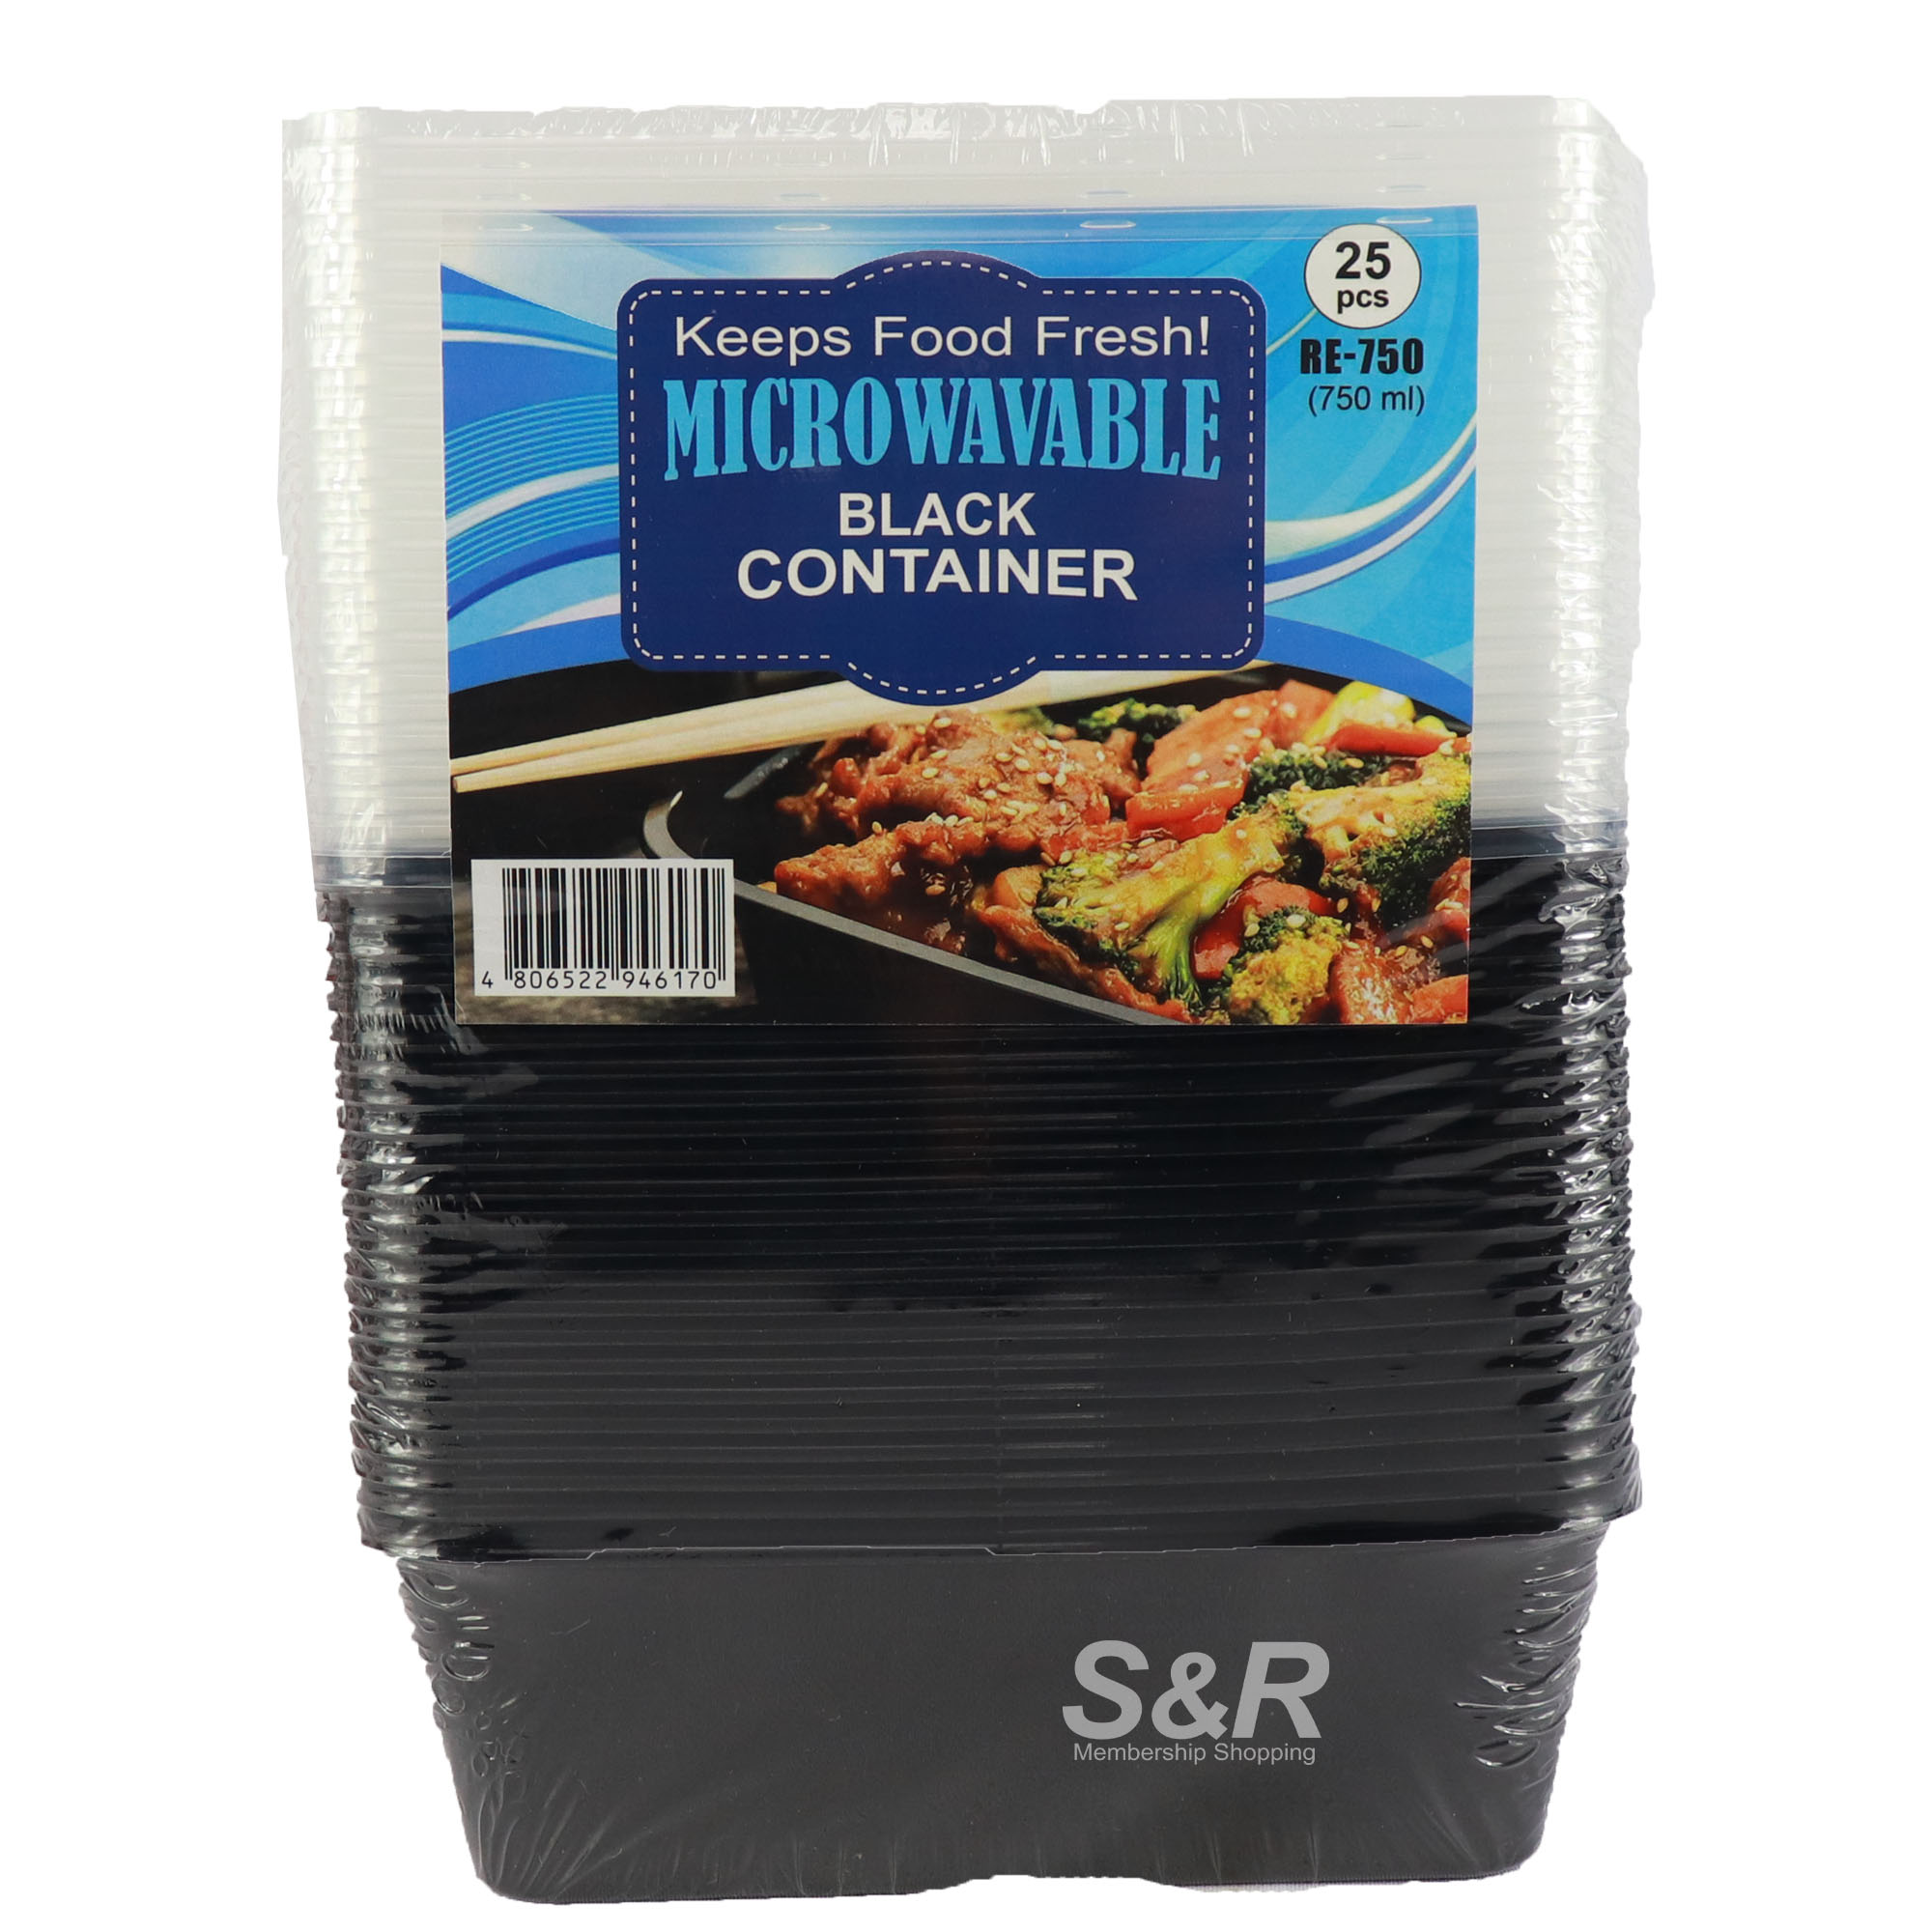 Carnival Microwavable Black Container 25pcs